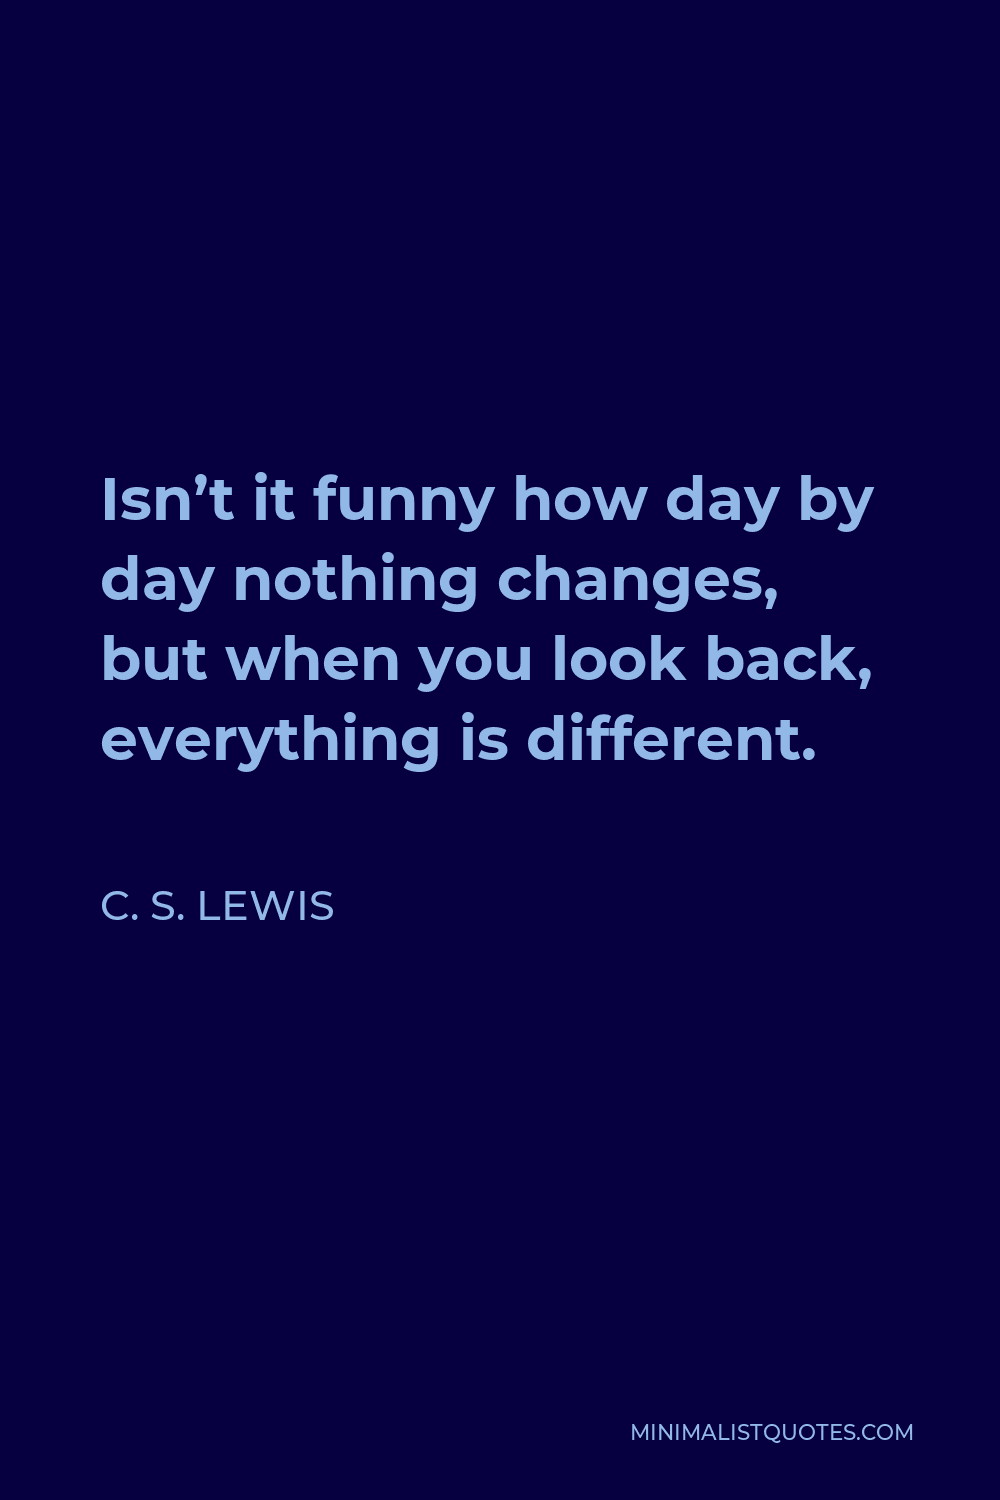 C. S. Lewis Quote - Isn’t it funny how day by day nothing changes, but when you look back, everything is different.